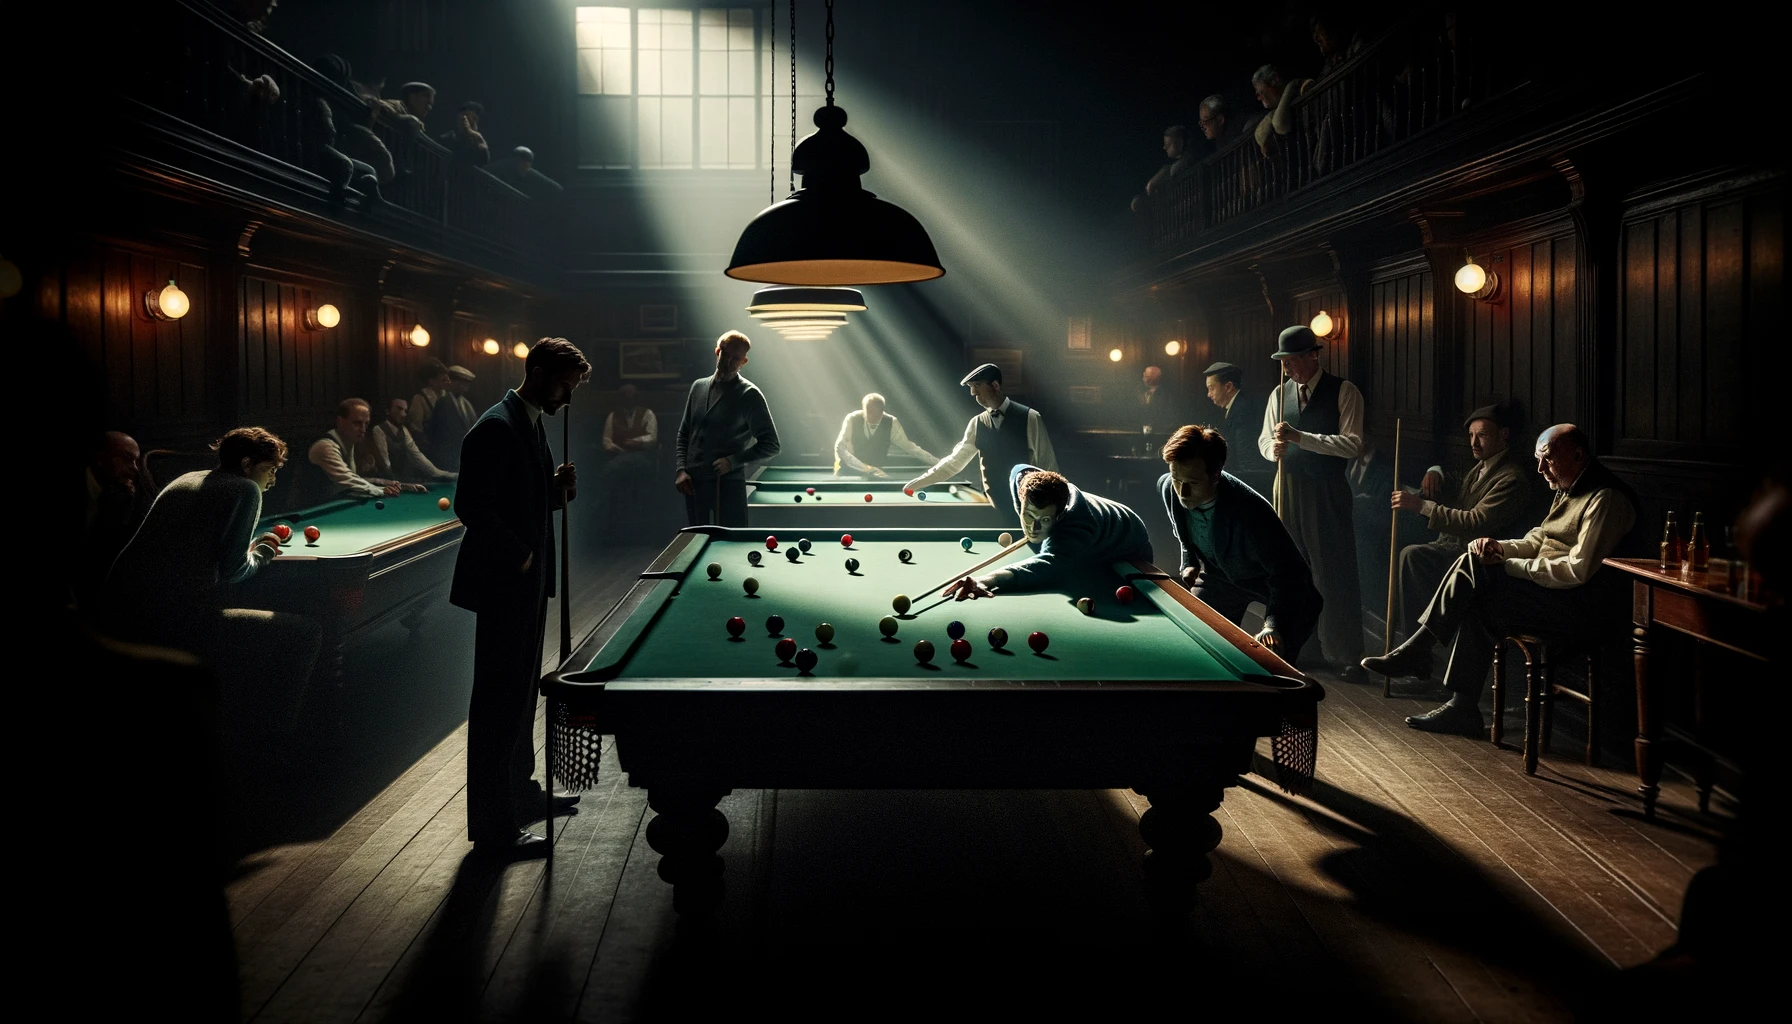 A dimly lit pool hall scene. "Stands for Pool," by Marcel Gagné, created with DALL-E. 